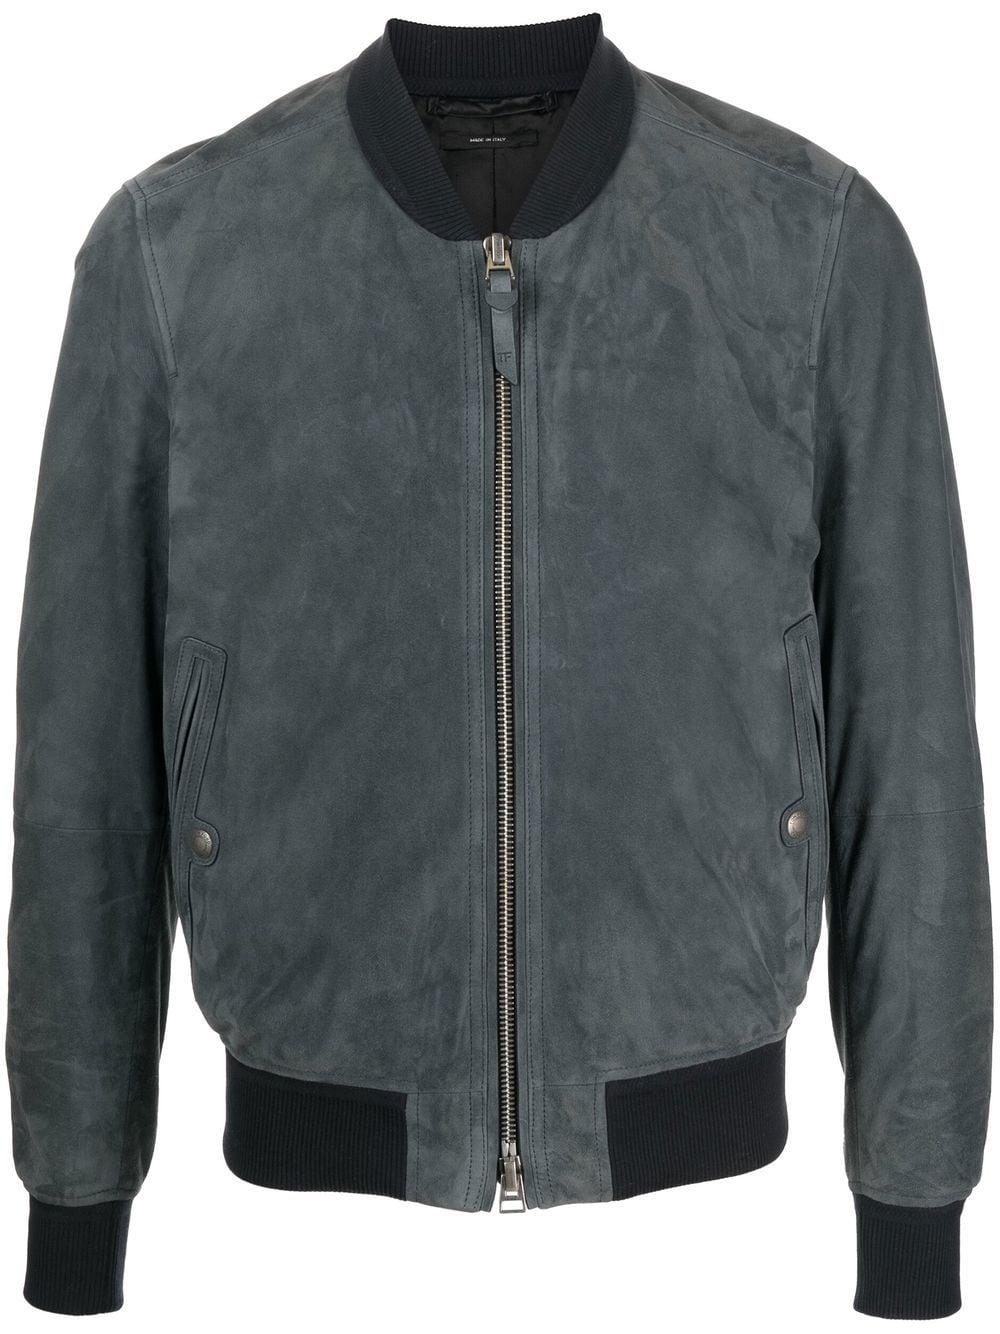 Tom Ford Suede-leather Bomber Jacket in Gray for Men | Lyst